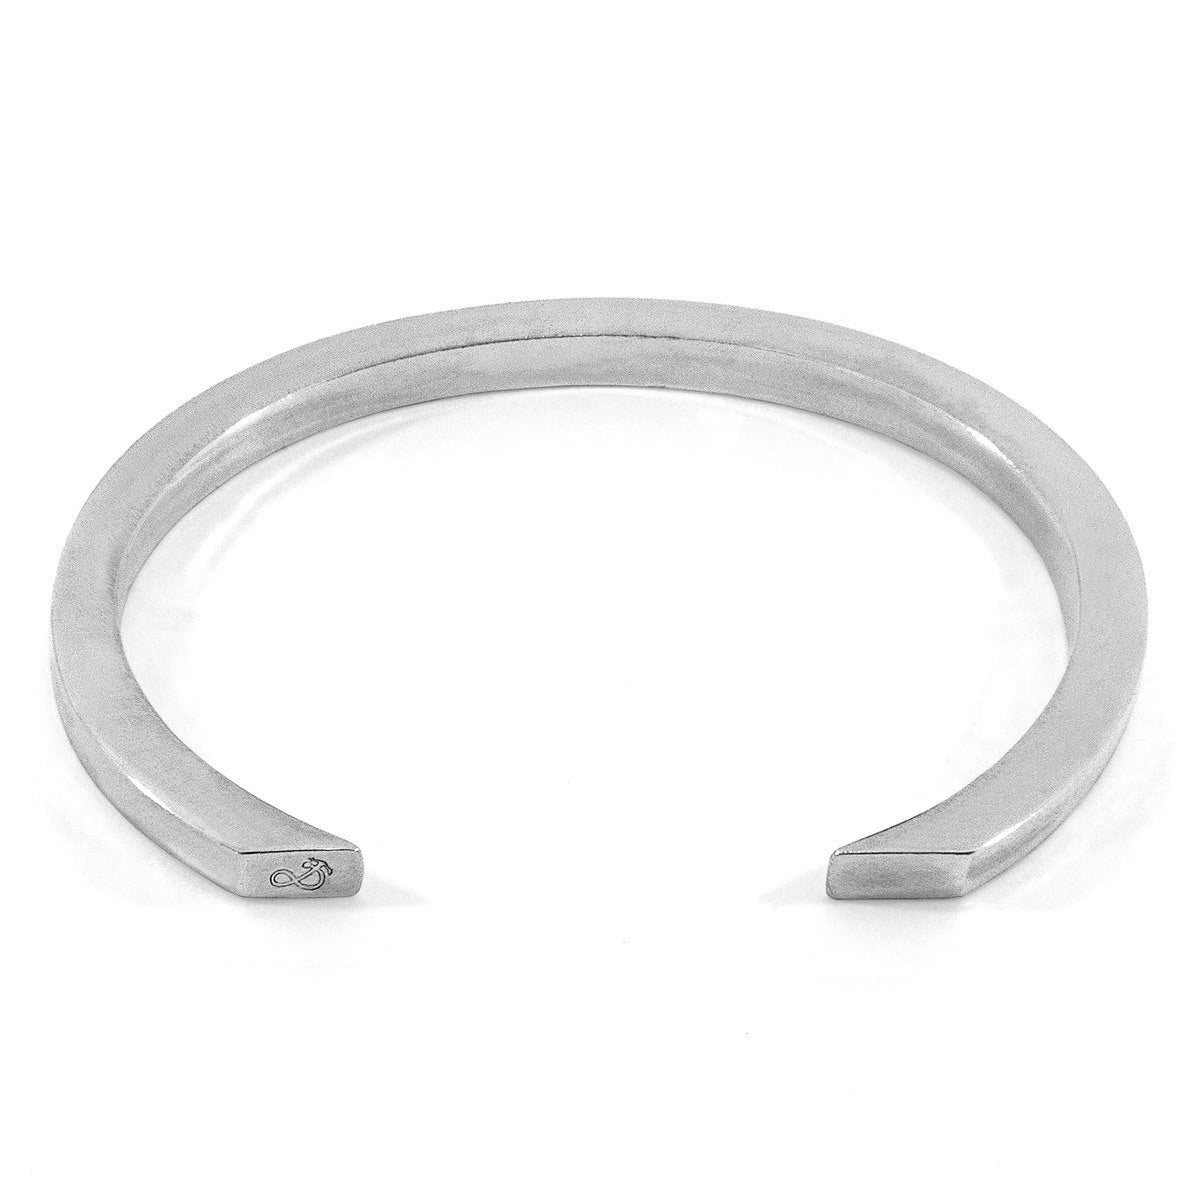 Maxi Wayfarer Silver Bangle: Handcrafted in Great Britain by ANCHOR & CREW - Jewelry & Watches - Bijou Her -  -  - 